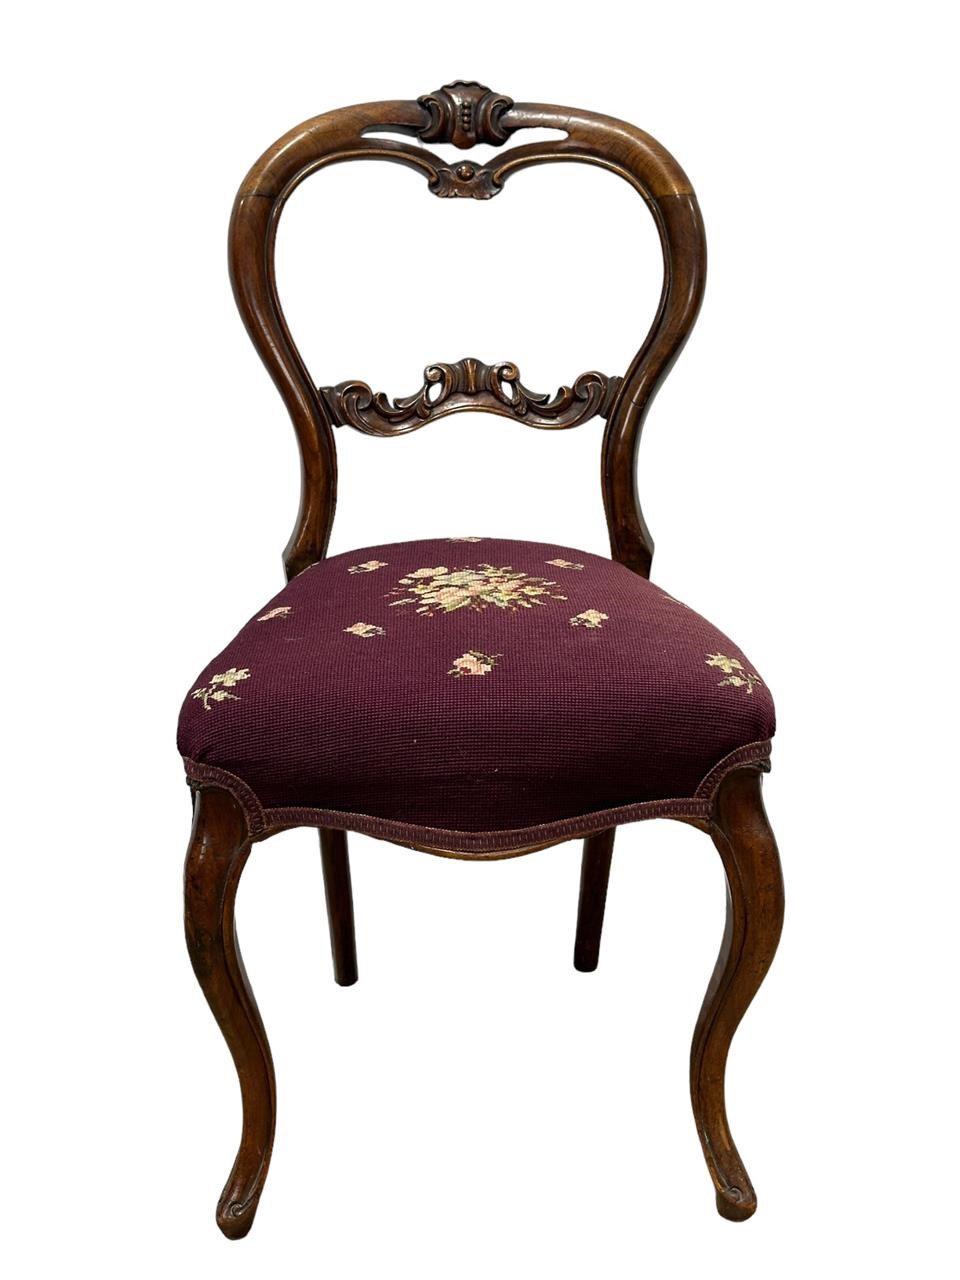 Antique Balloon Back Embordered Chair